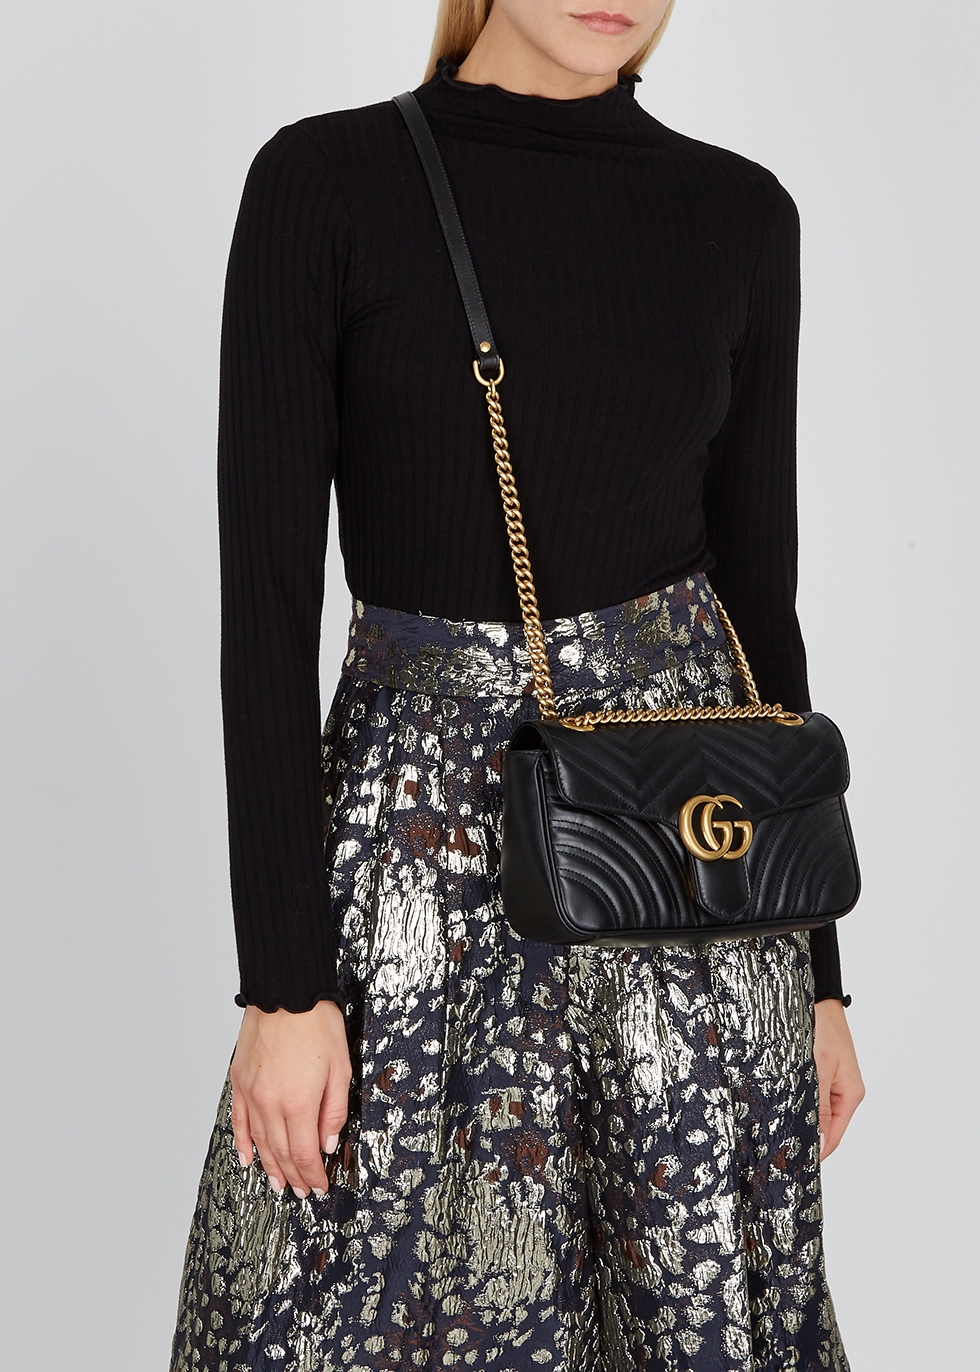 gg marmont small shoulder bag